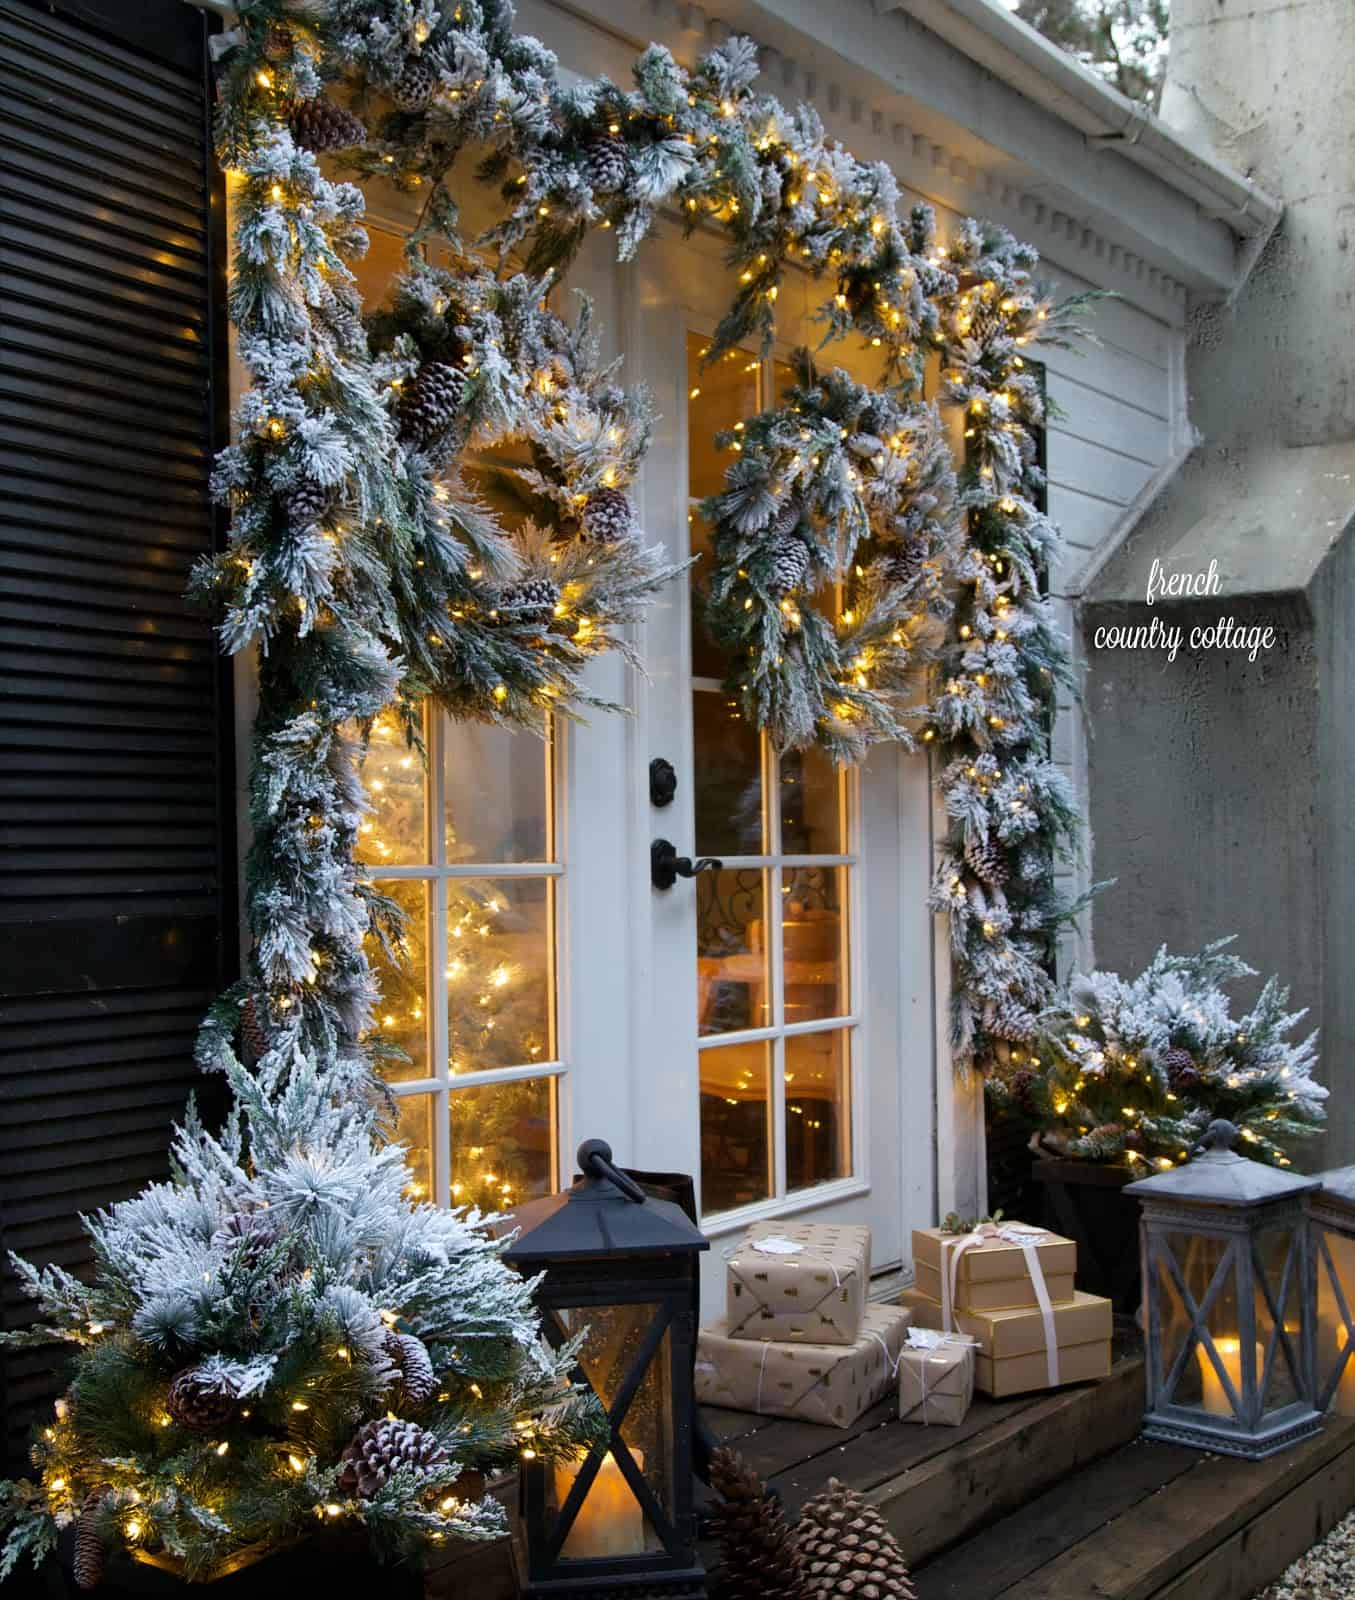 30 Stunning Outdoor Christmas Decorations To Make The Season Bright